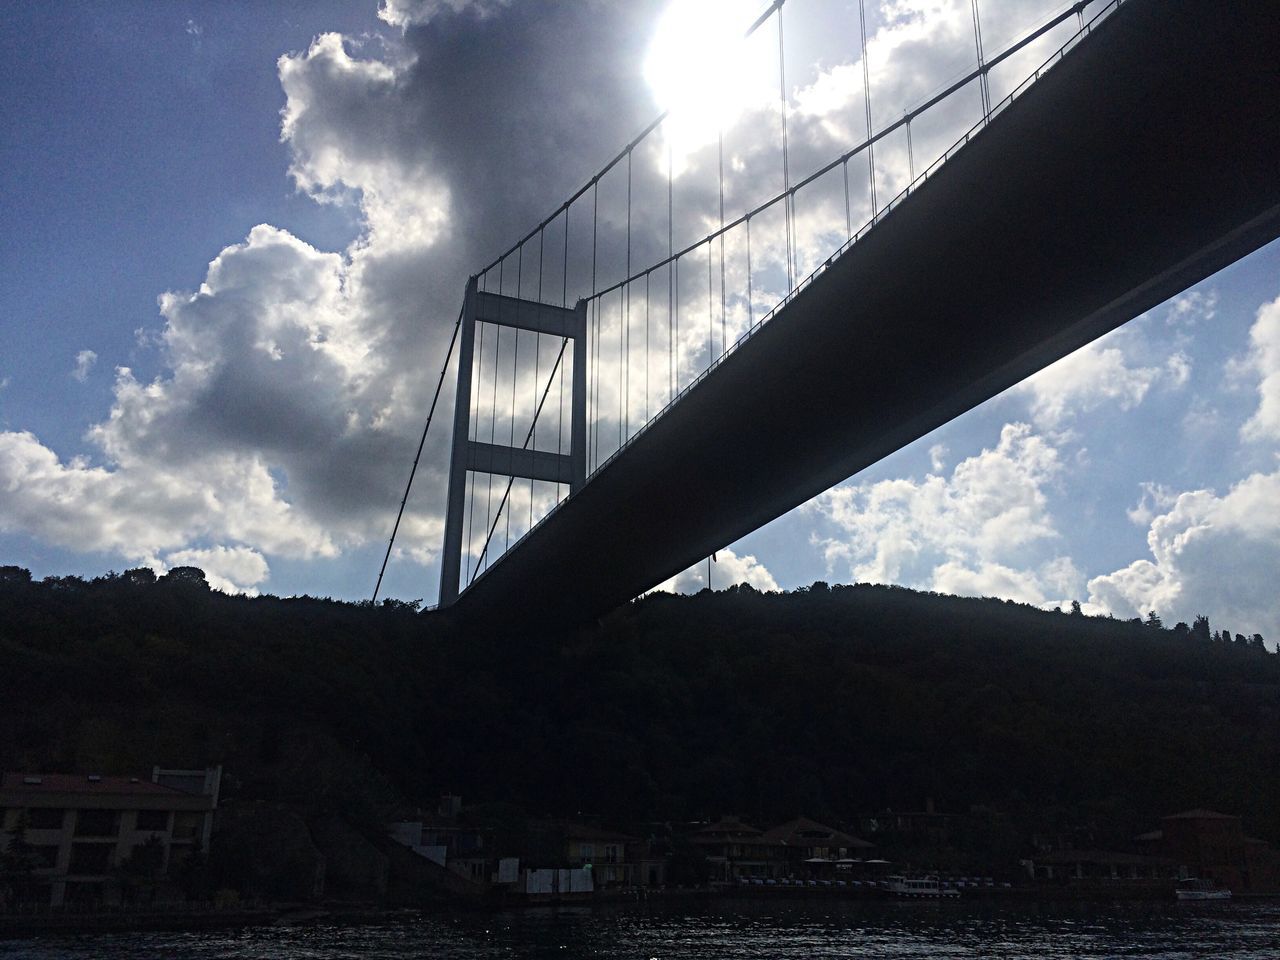 built structure, architecture, low angle view, sky, bridge - man made structure, connection, cloud - sky, engineering, bridge, cloud, silhouette, railing, sunlight, suspension bridge, no people, outdoors, day, cloudy, mountain, transportation